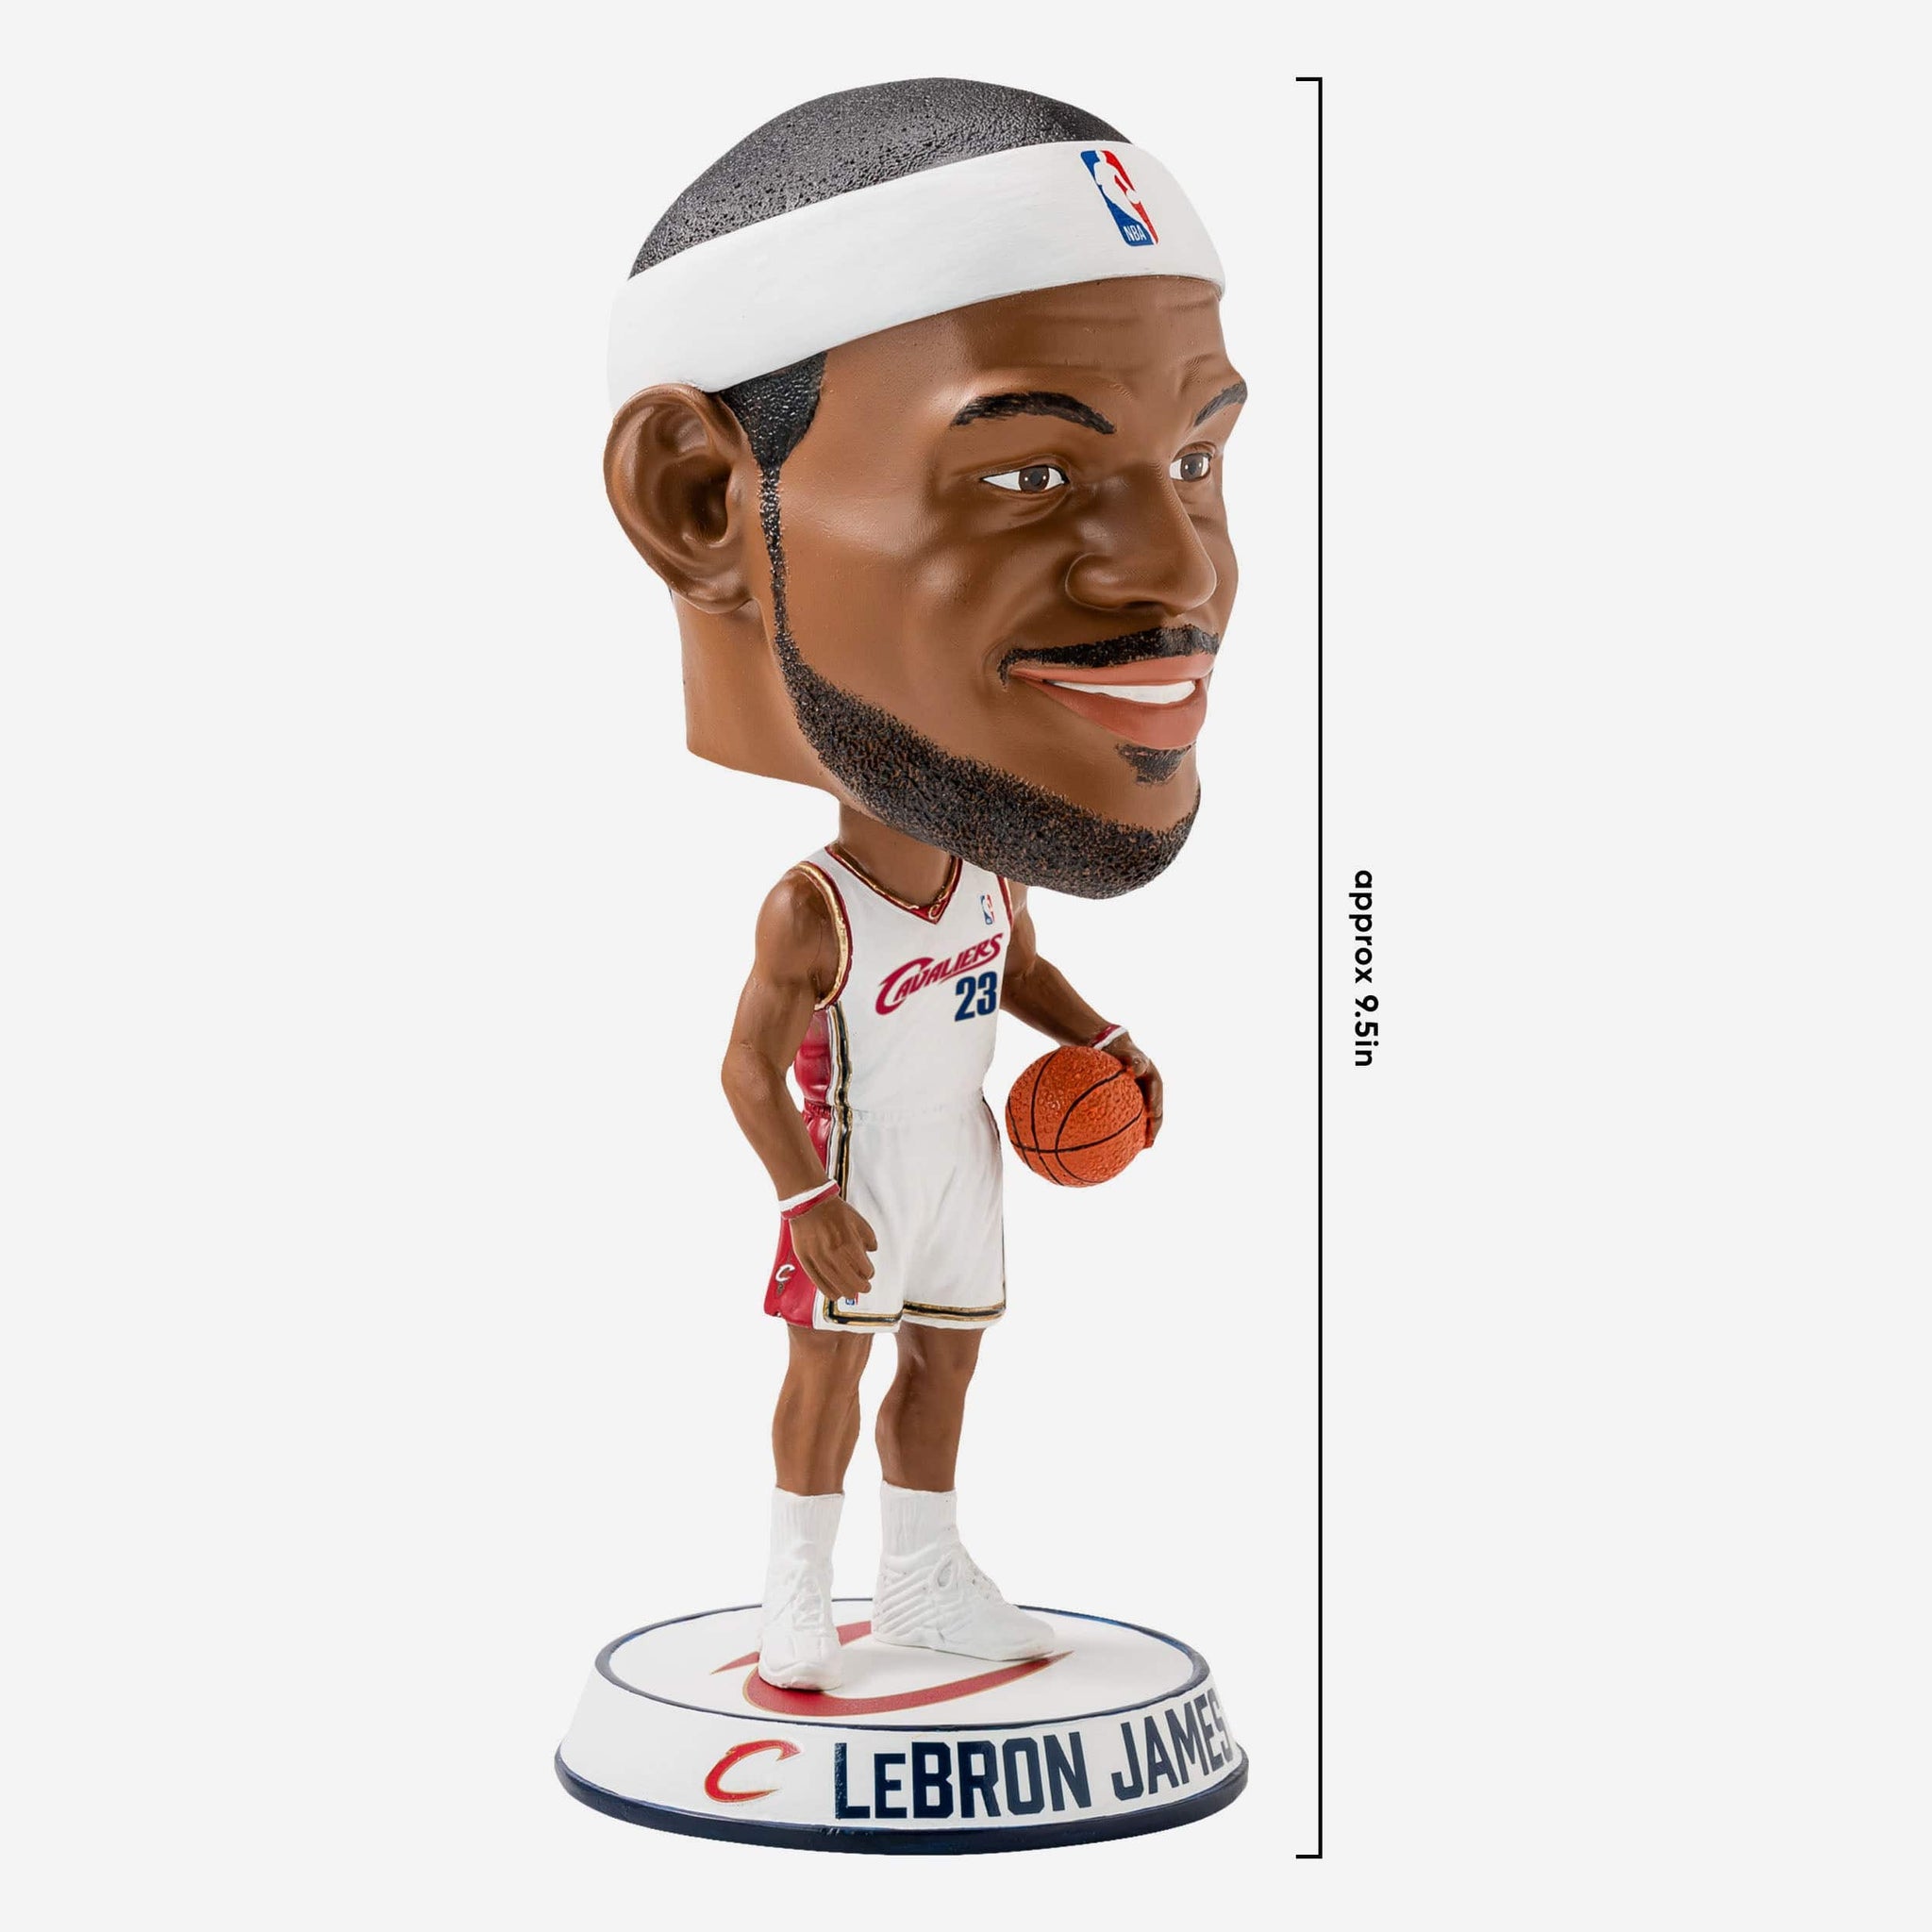 FOCO Cleveland Cavaliers Officially Licensed Home Decor. Cleveland